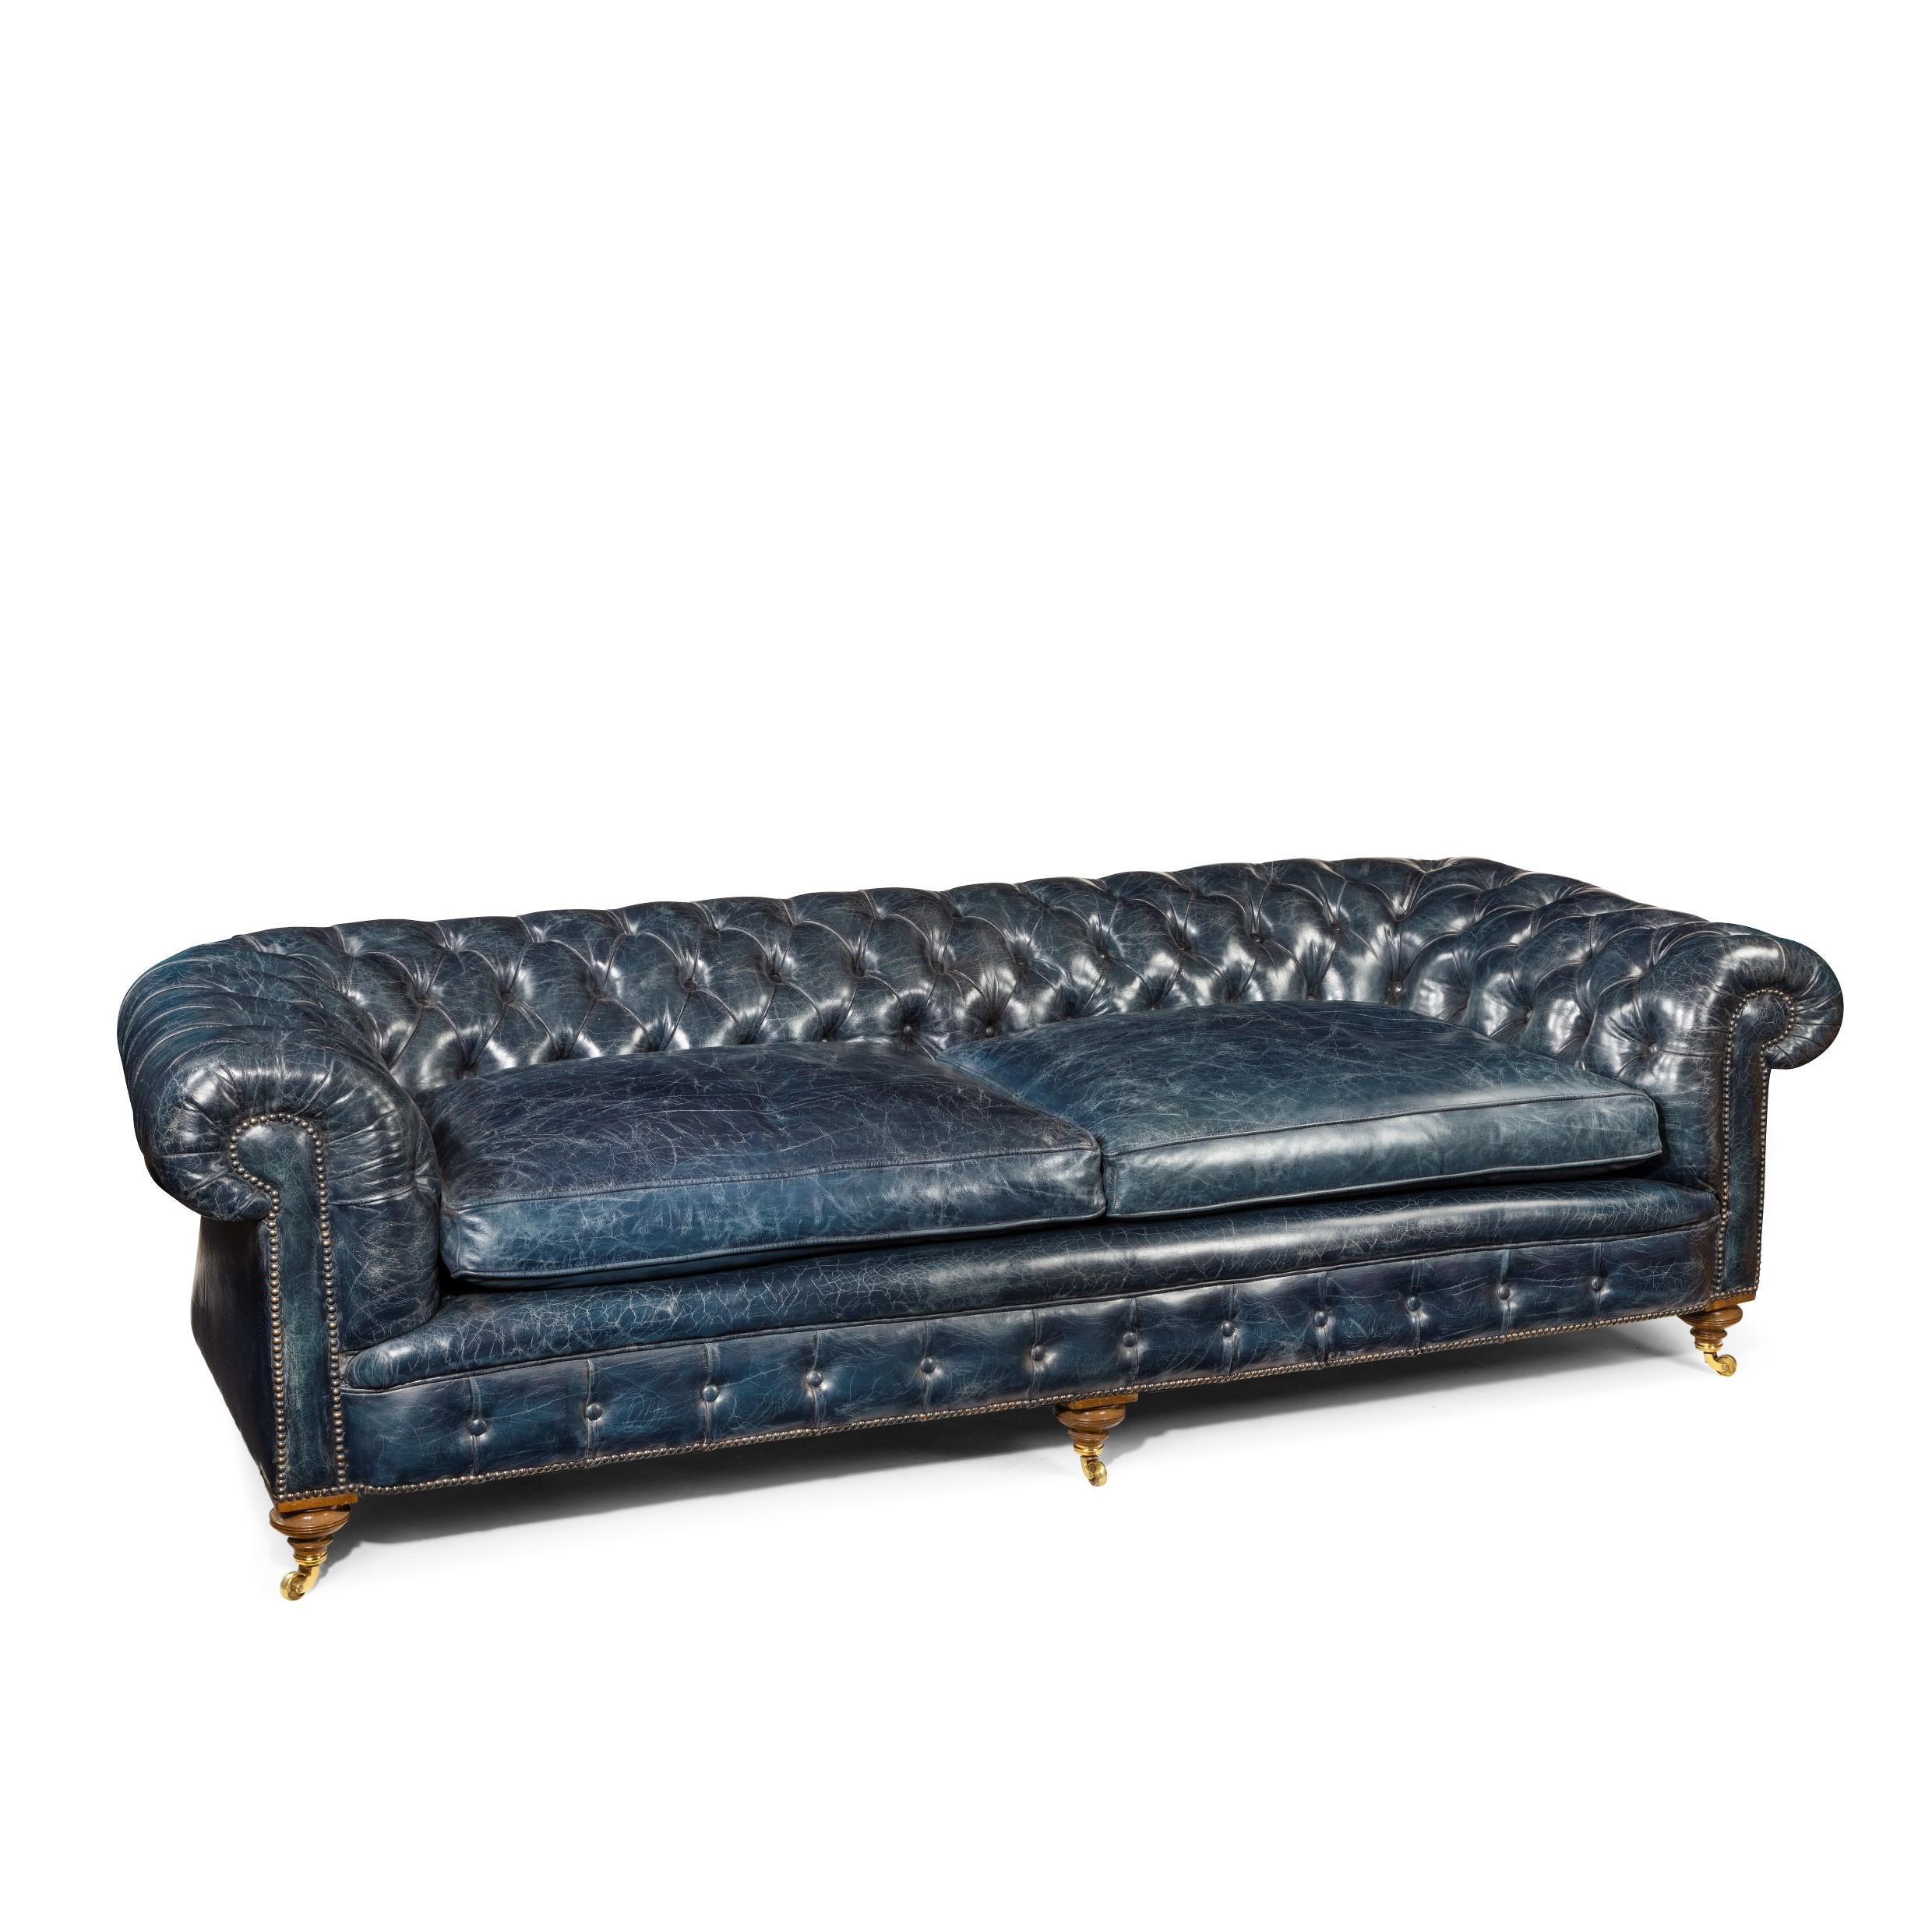 A Victorian three seater walnut chesterfield sofa, of typical form with rolled arms and two seat cushions, on turned and reeded legs with the original castors, reupholstered in deep-buttoned and distressed blue leather. English,